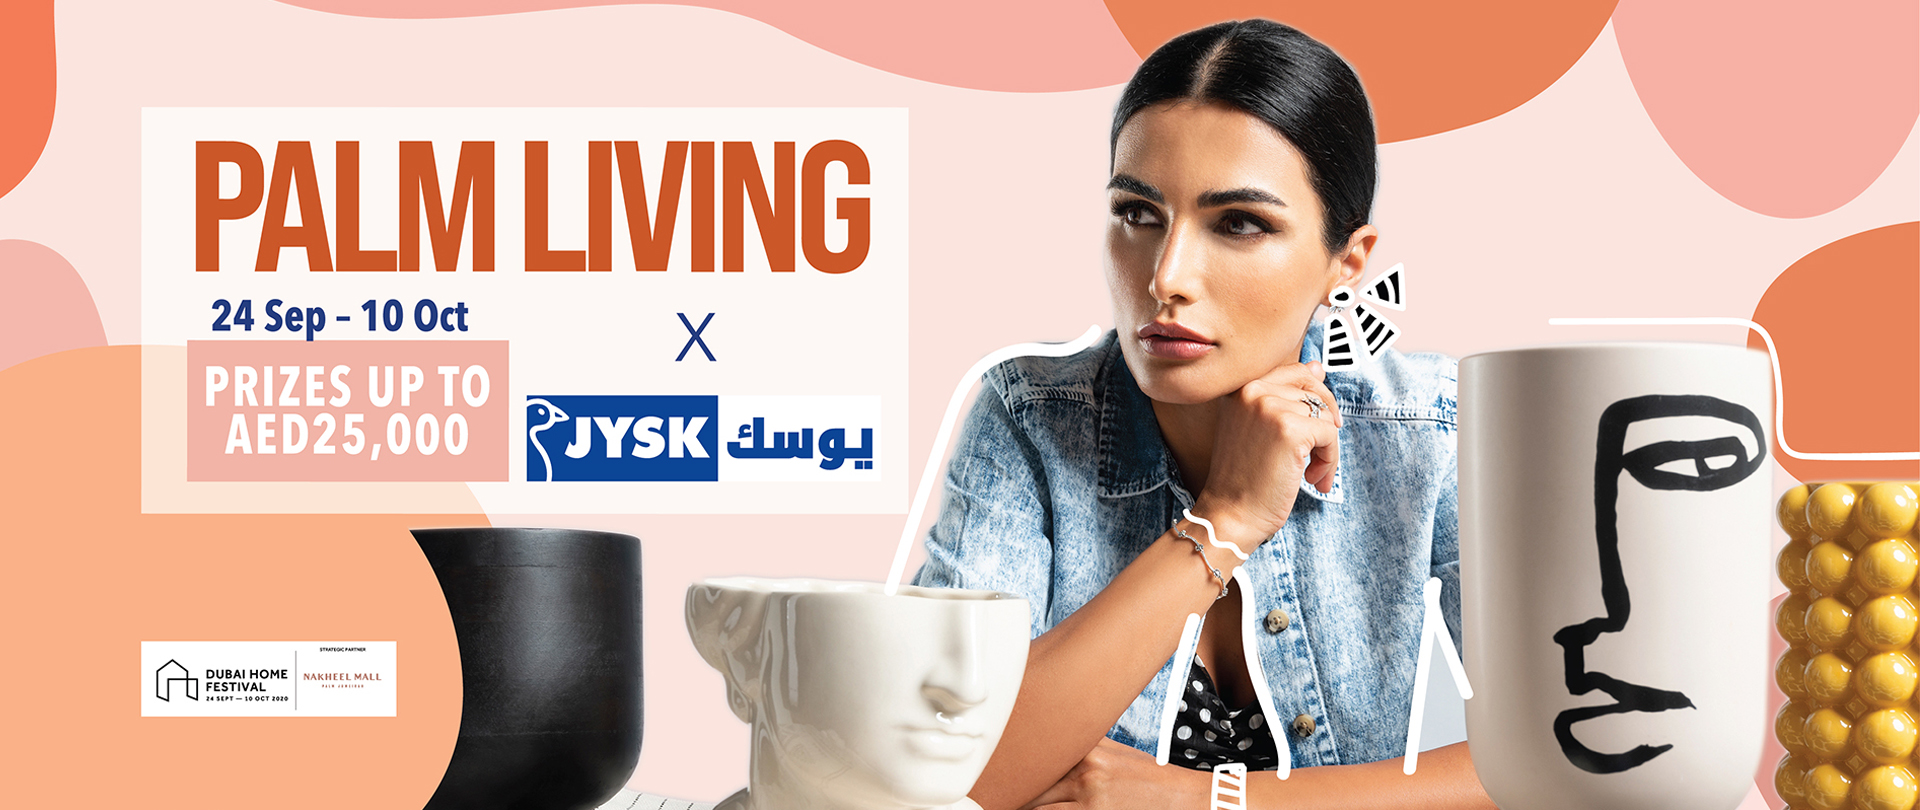 Celebrate Palm Living’ at Nakheel Mall and win prizes up to AED 25,000 by JYSK 